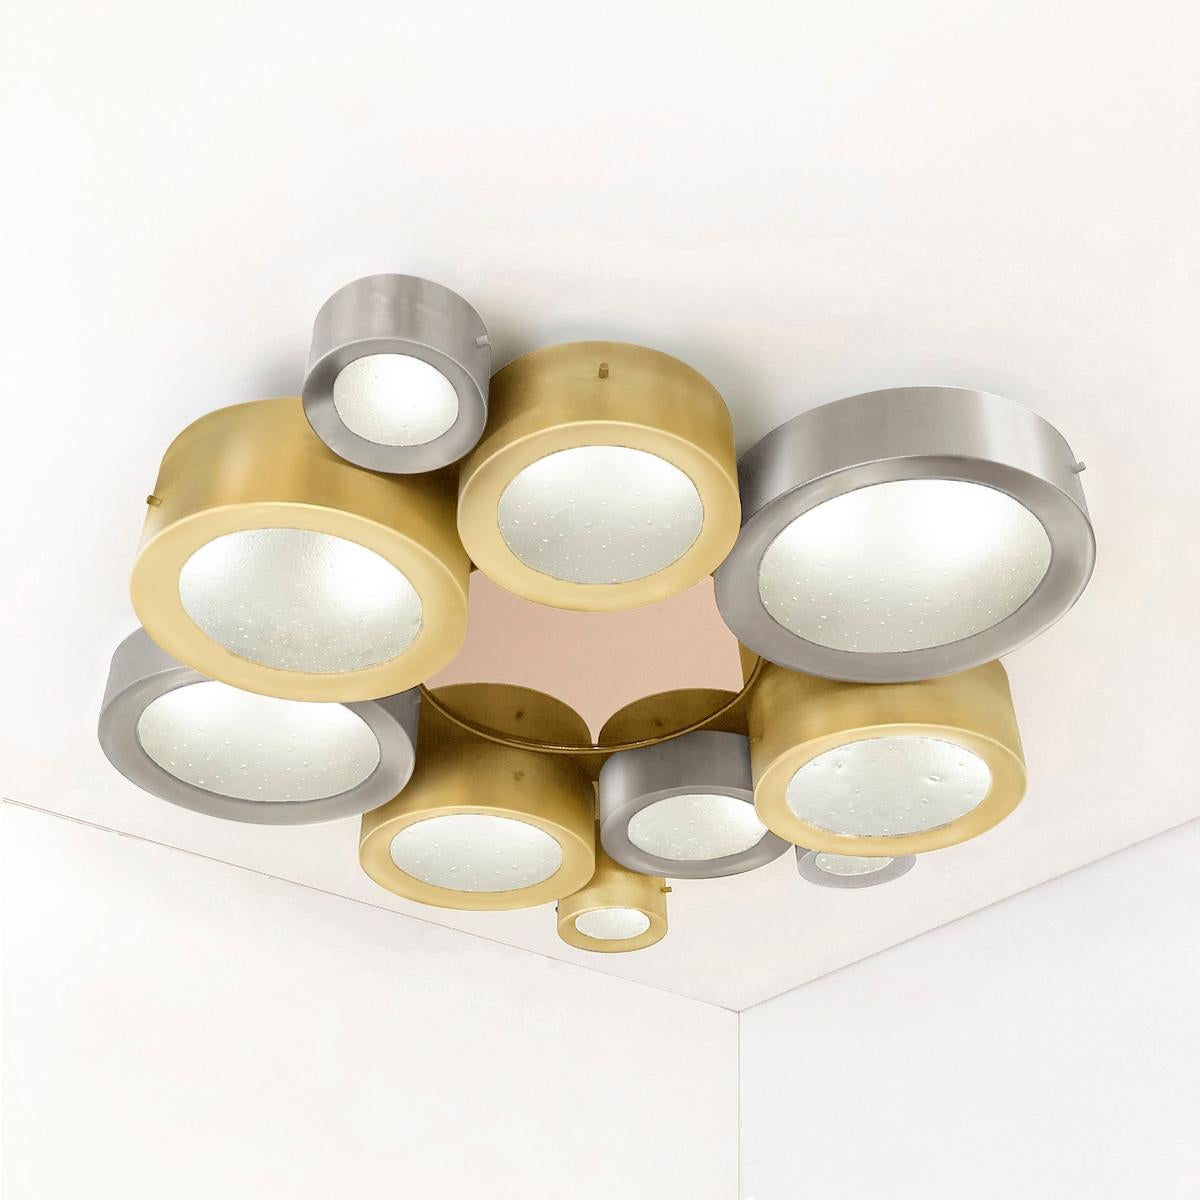 The Helios ceiling light features an imposing composition of illuminated Murano glass shades gravitating around a central tinted mirror. The first images show the fixture in satin brass and satin nickel with a rose center mirror-subsequent pictures